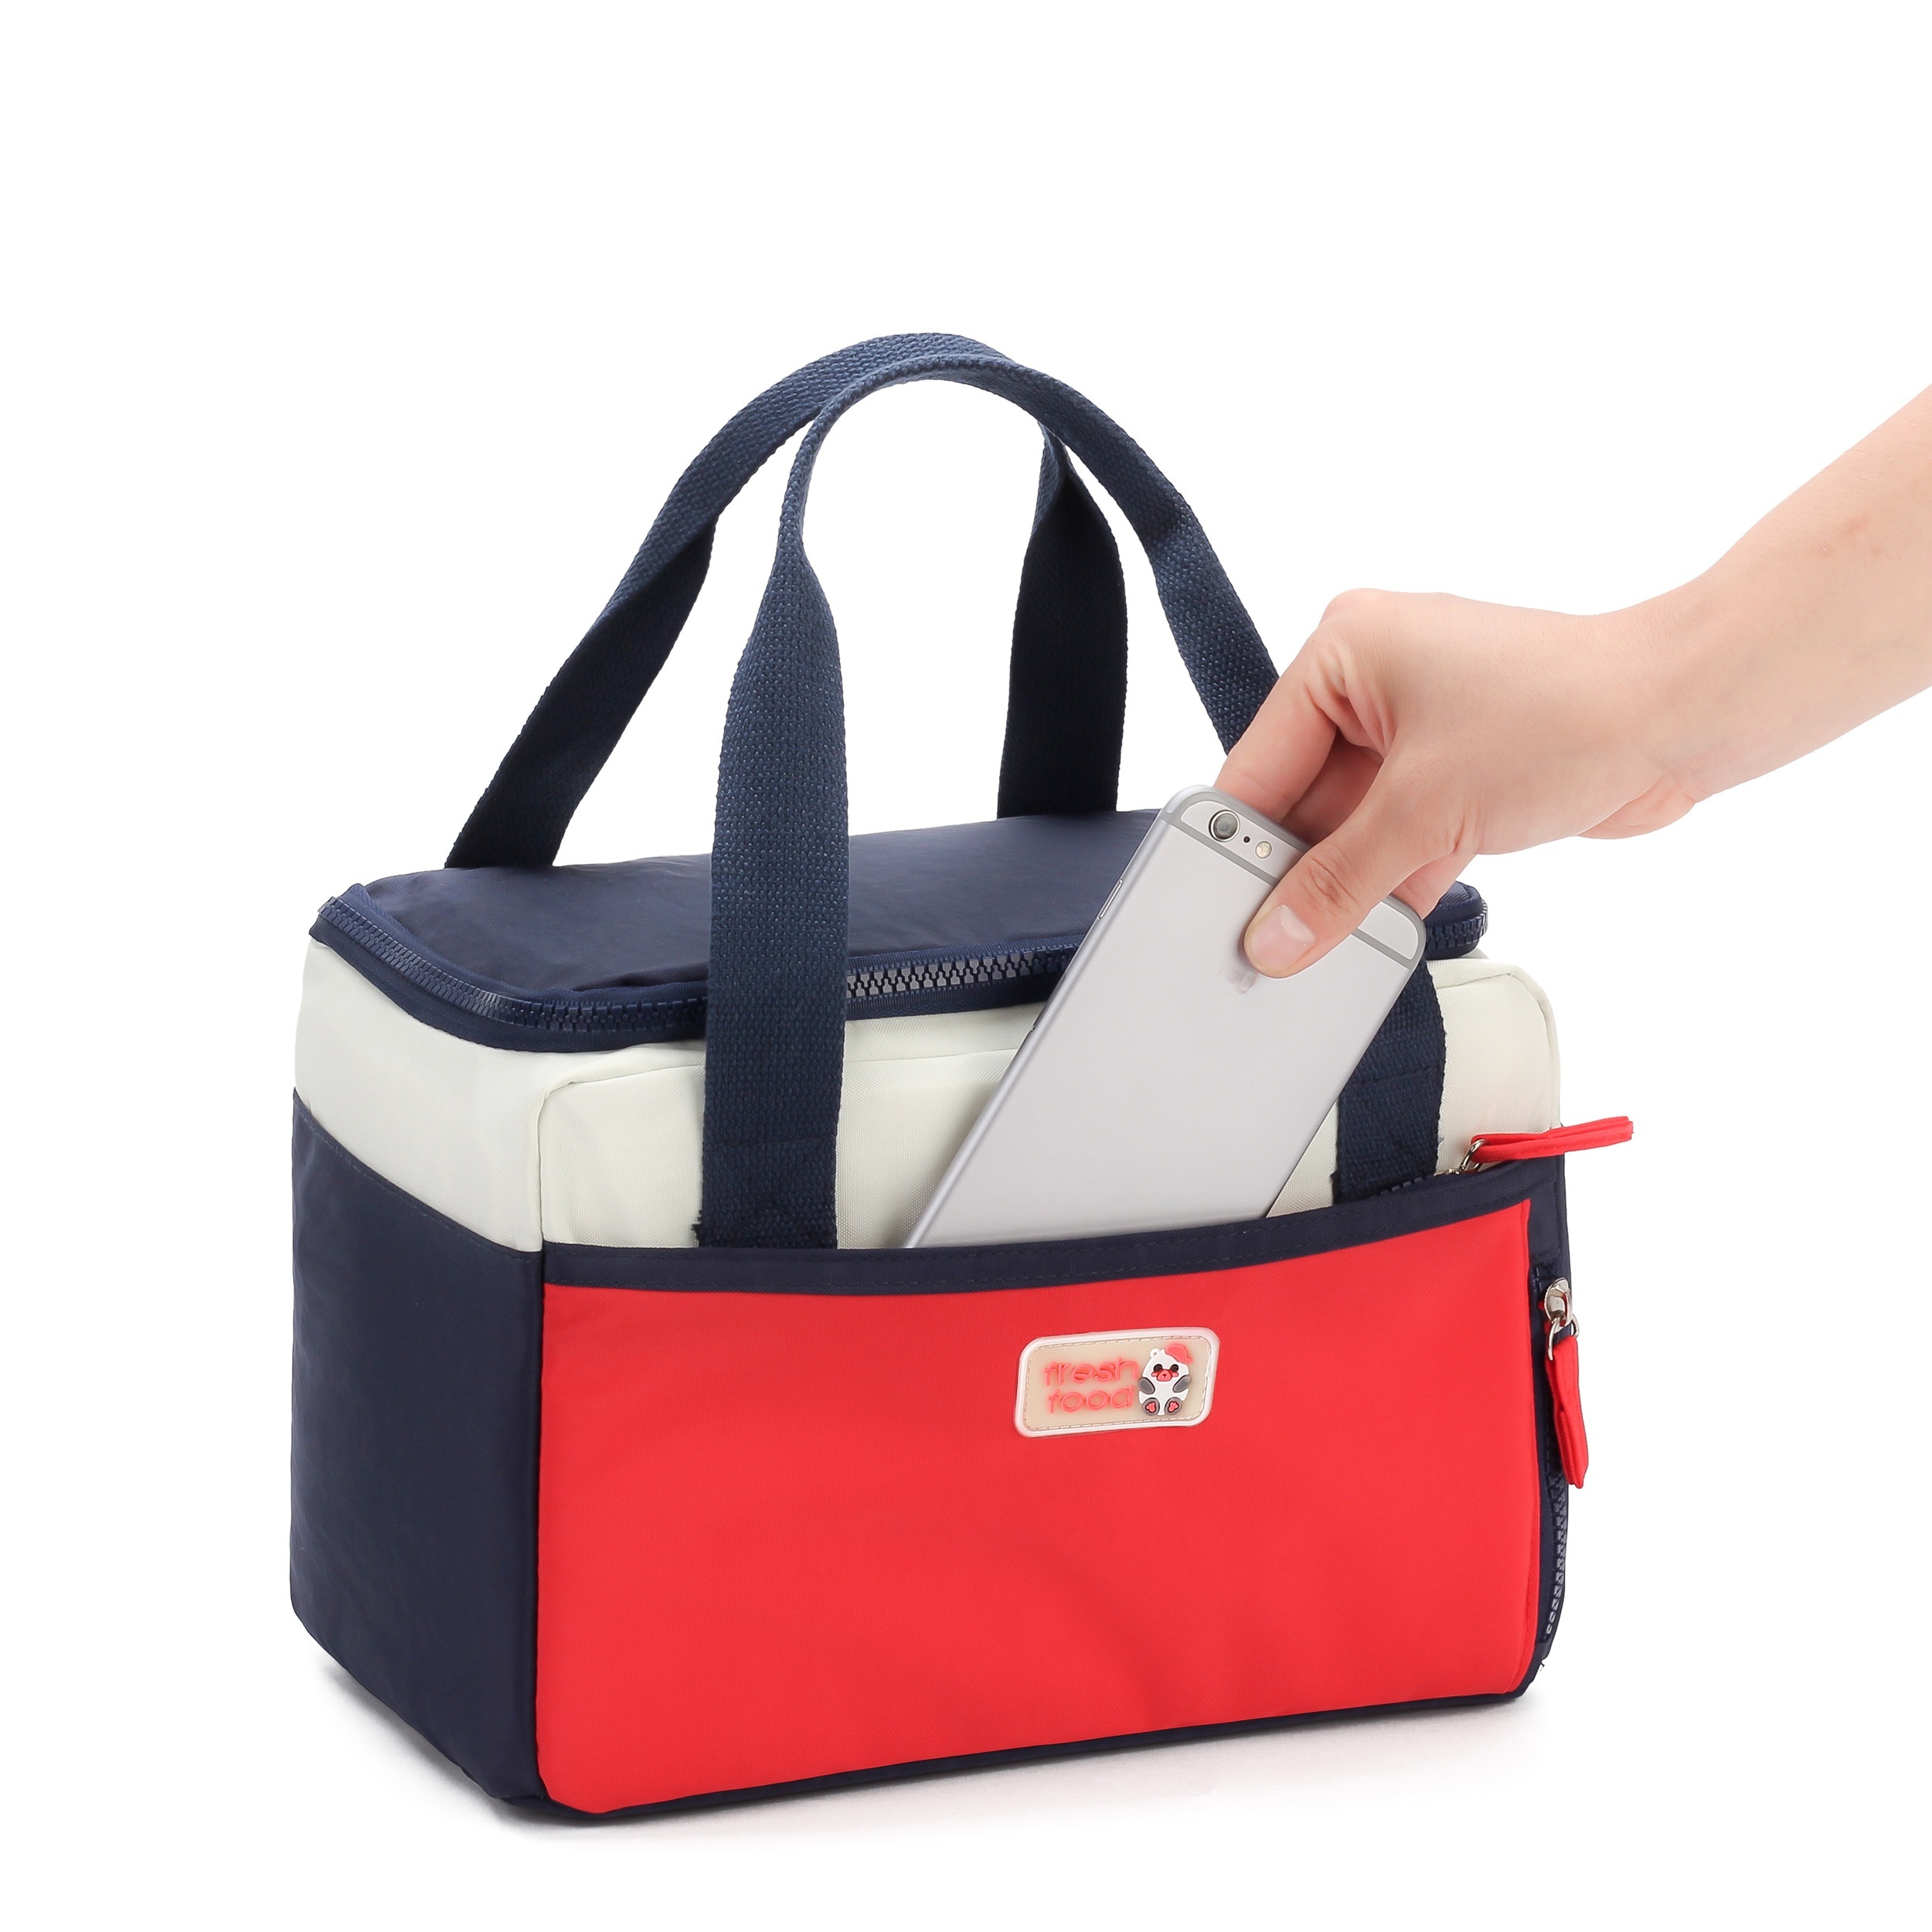 Insulated Lunch Bag Reusable Lunch Box Tote Bag for Women, Men